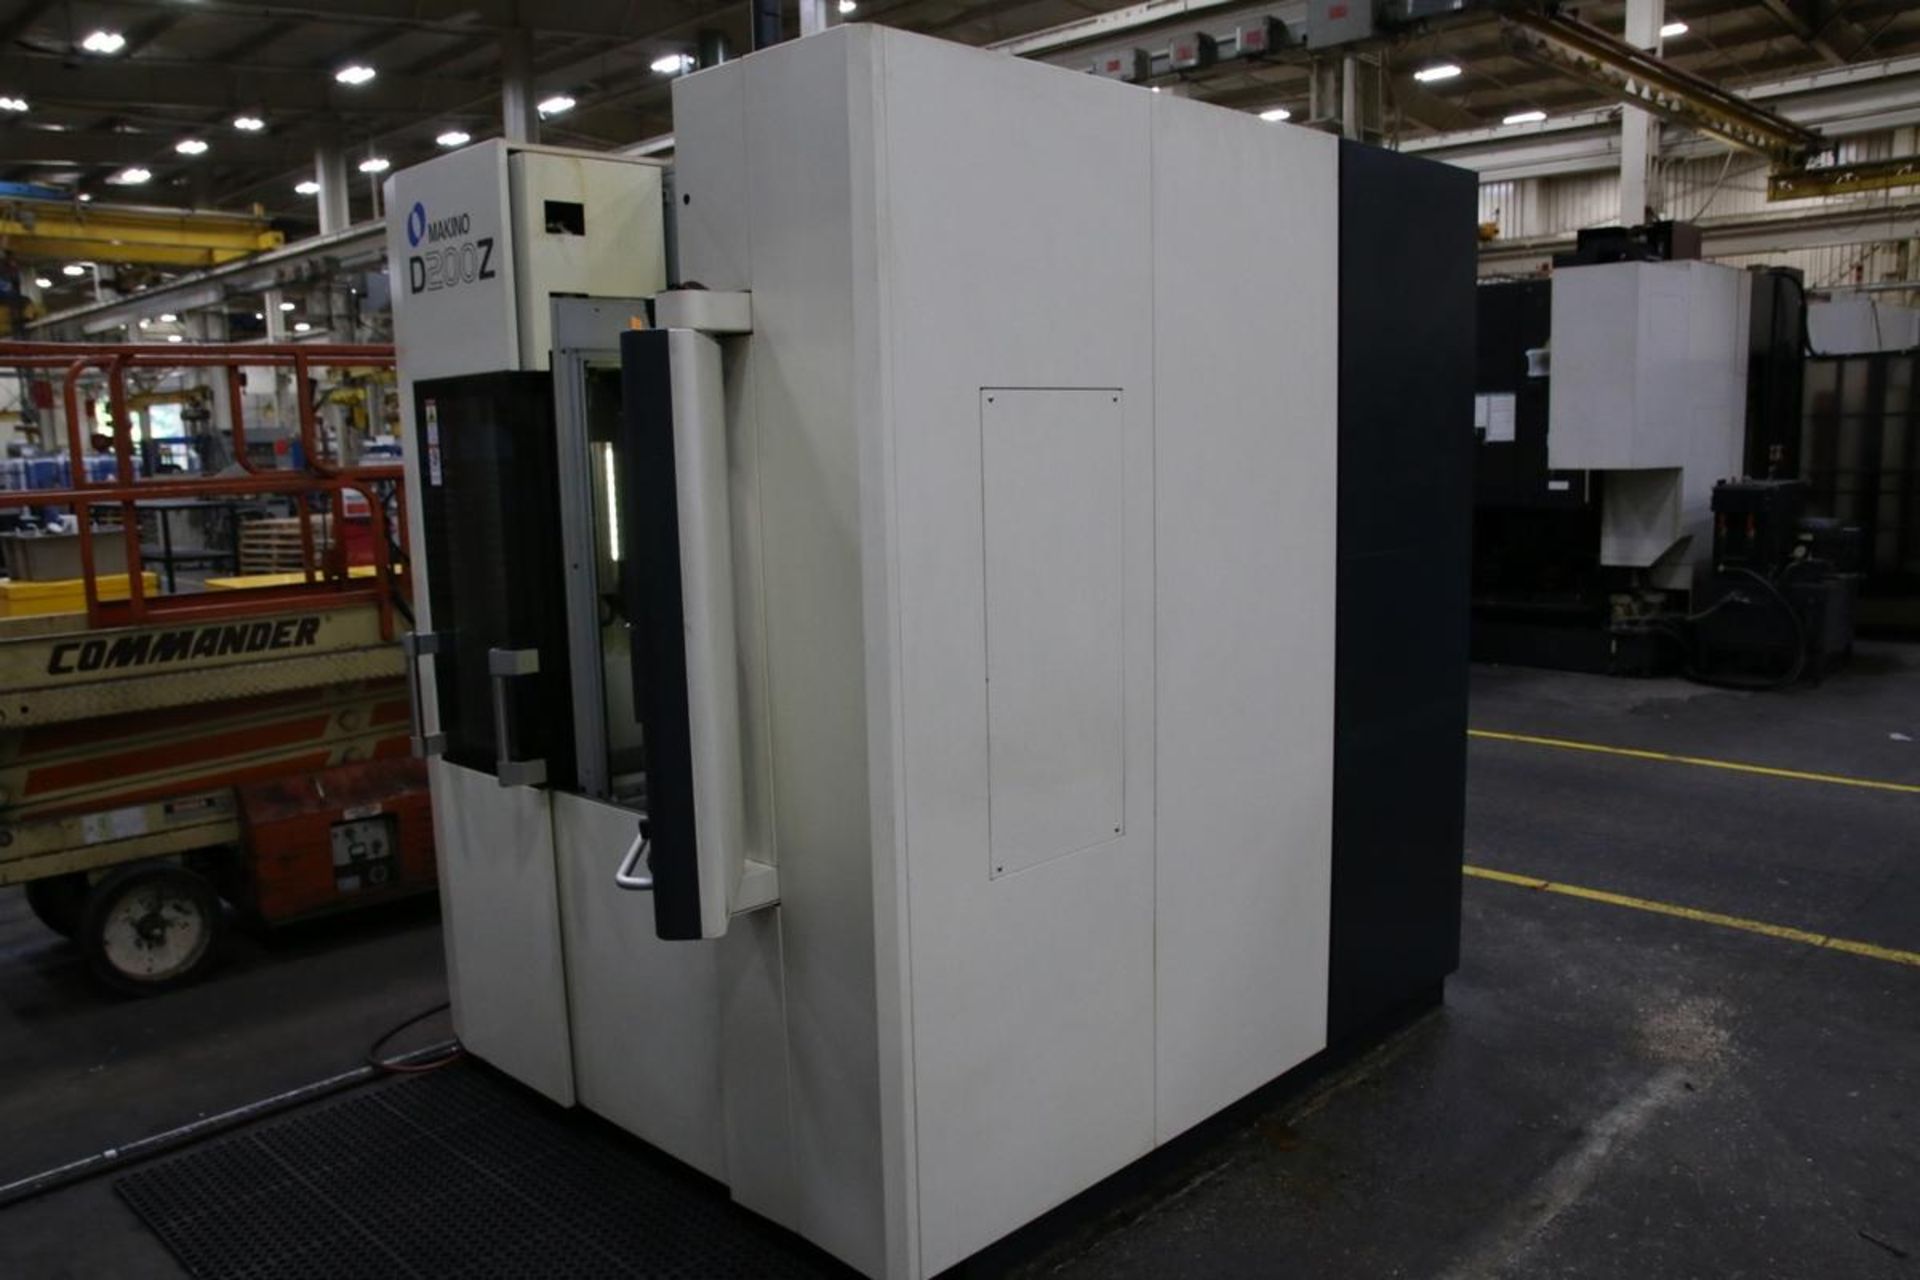 2018 Makino D200Z 5-Axis High Speed CNC Vertical Machining Center - Image 7 of 20